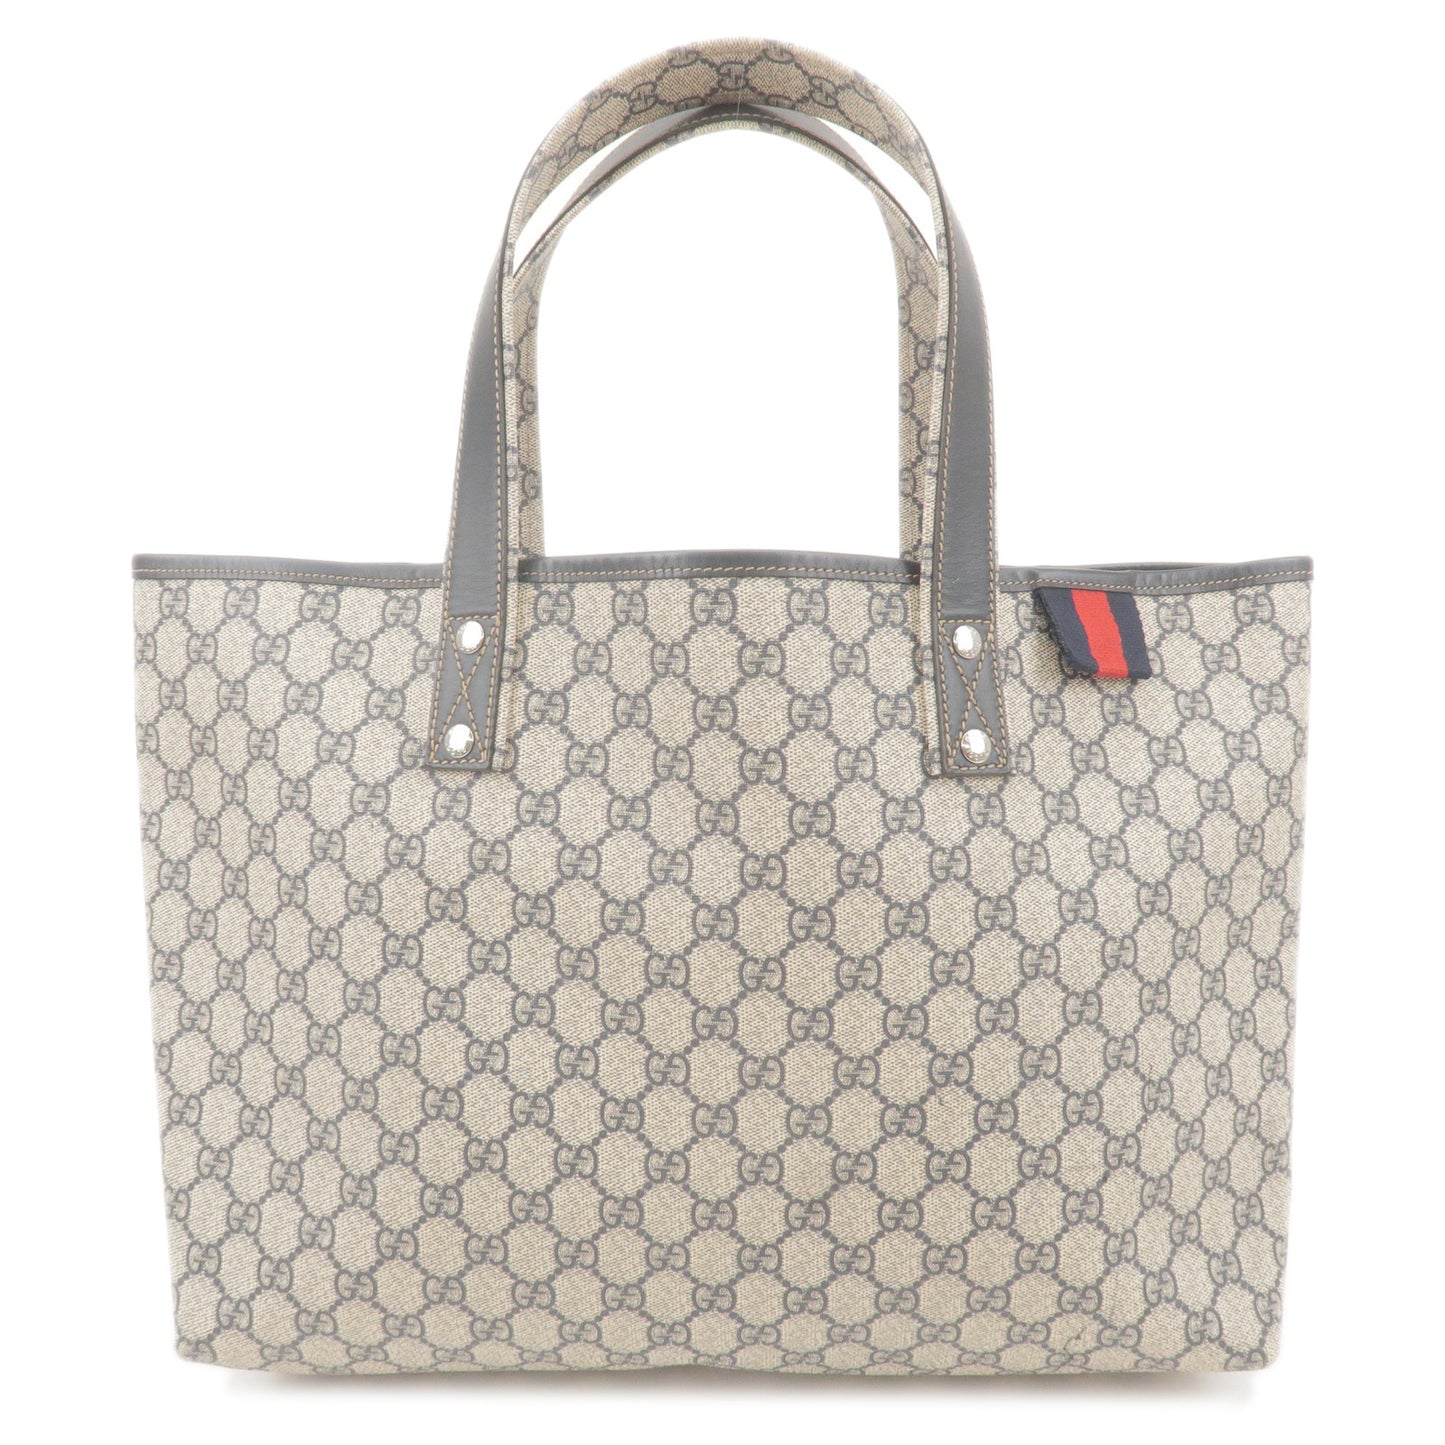 GUCCI-Sherry-GG-Supreme-Leather-Tote-Bag-Navy-Beige-211134